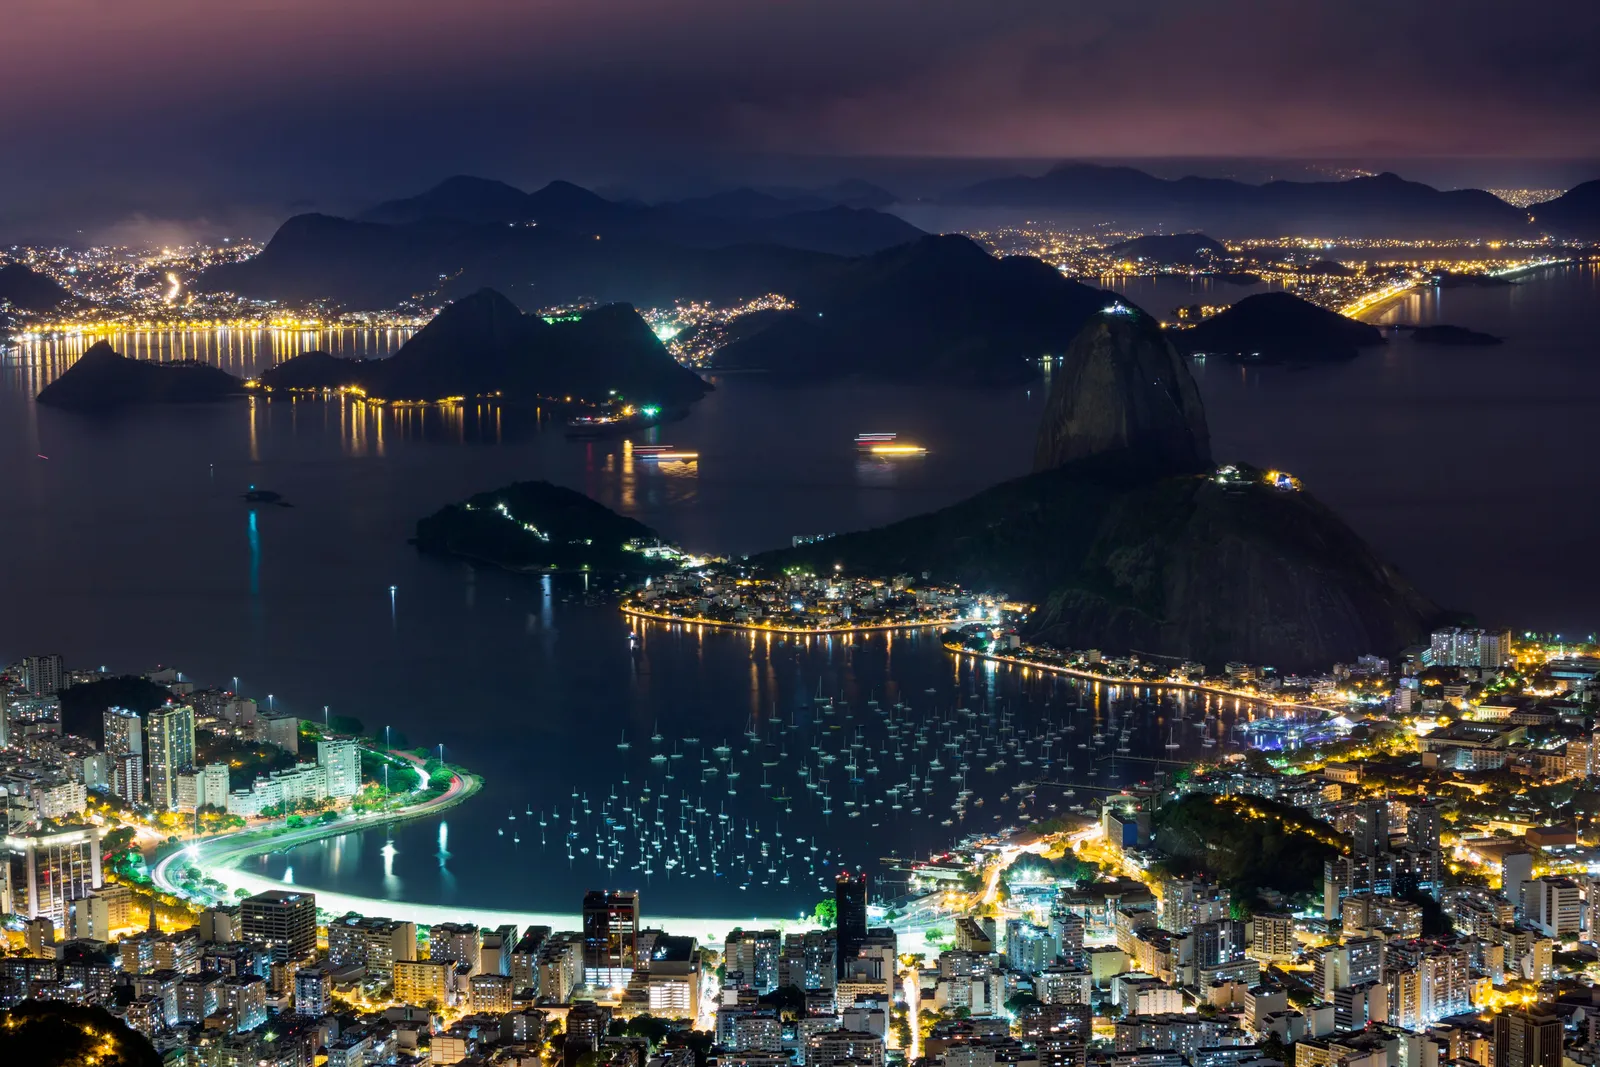 7 Most Instagrammable Places in Rio De Janeiro